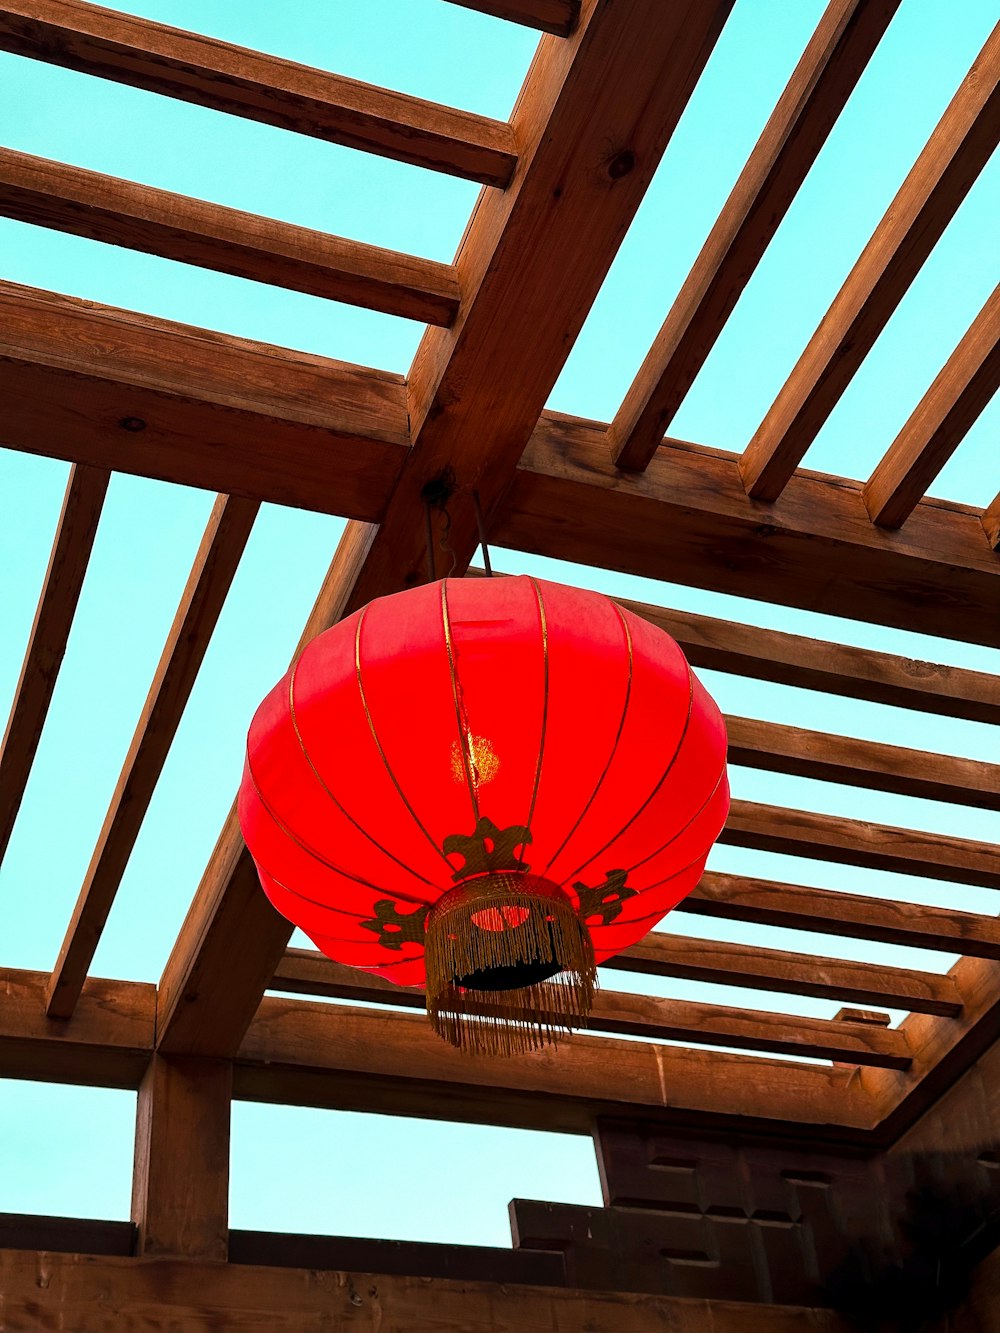 a red lantern hanging from a wooden roof